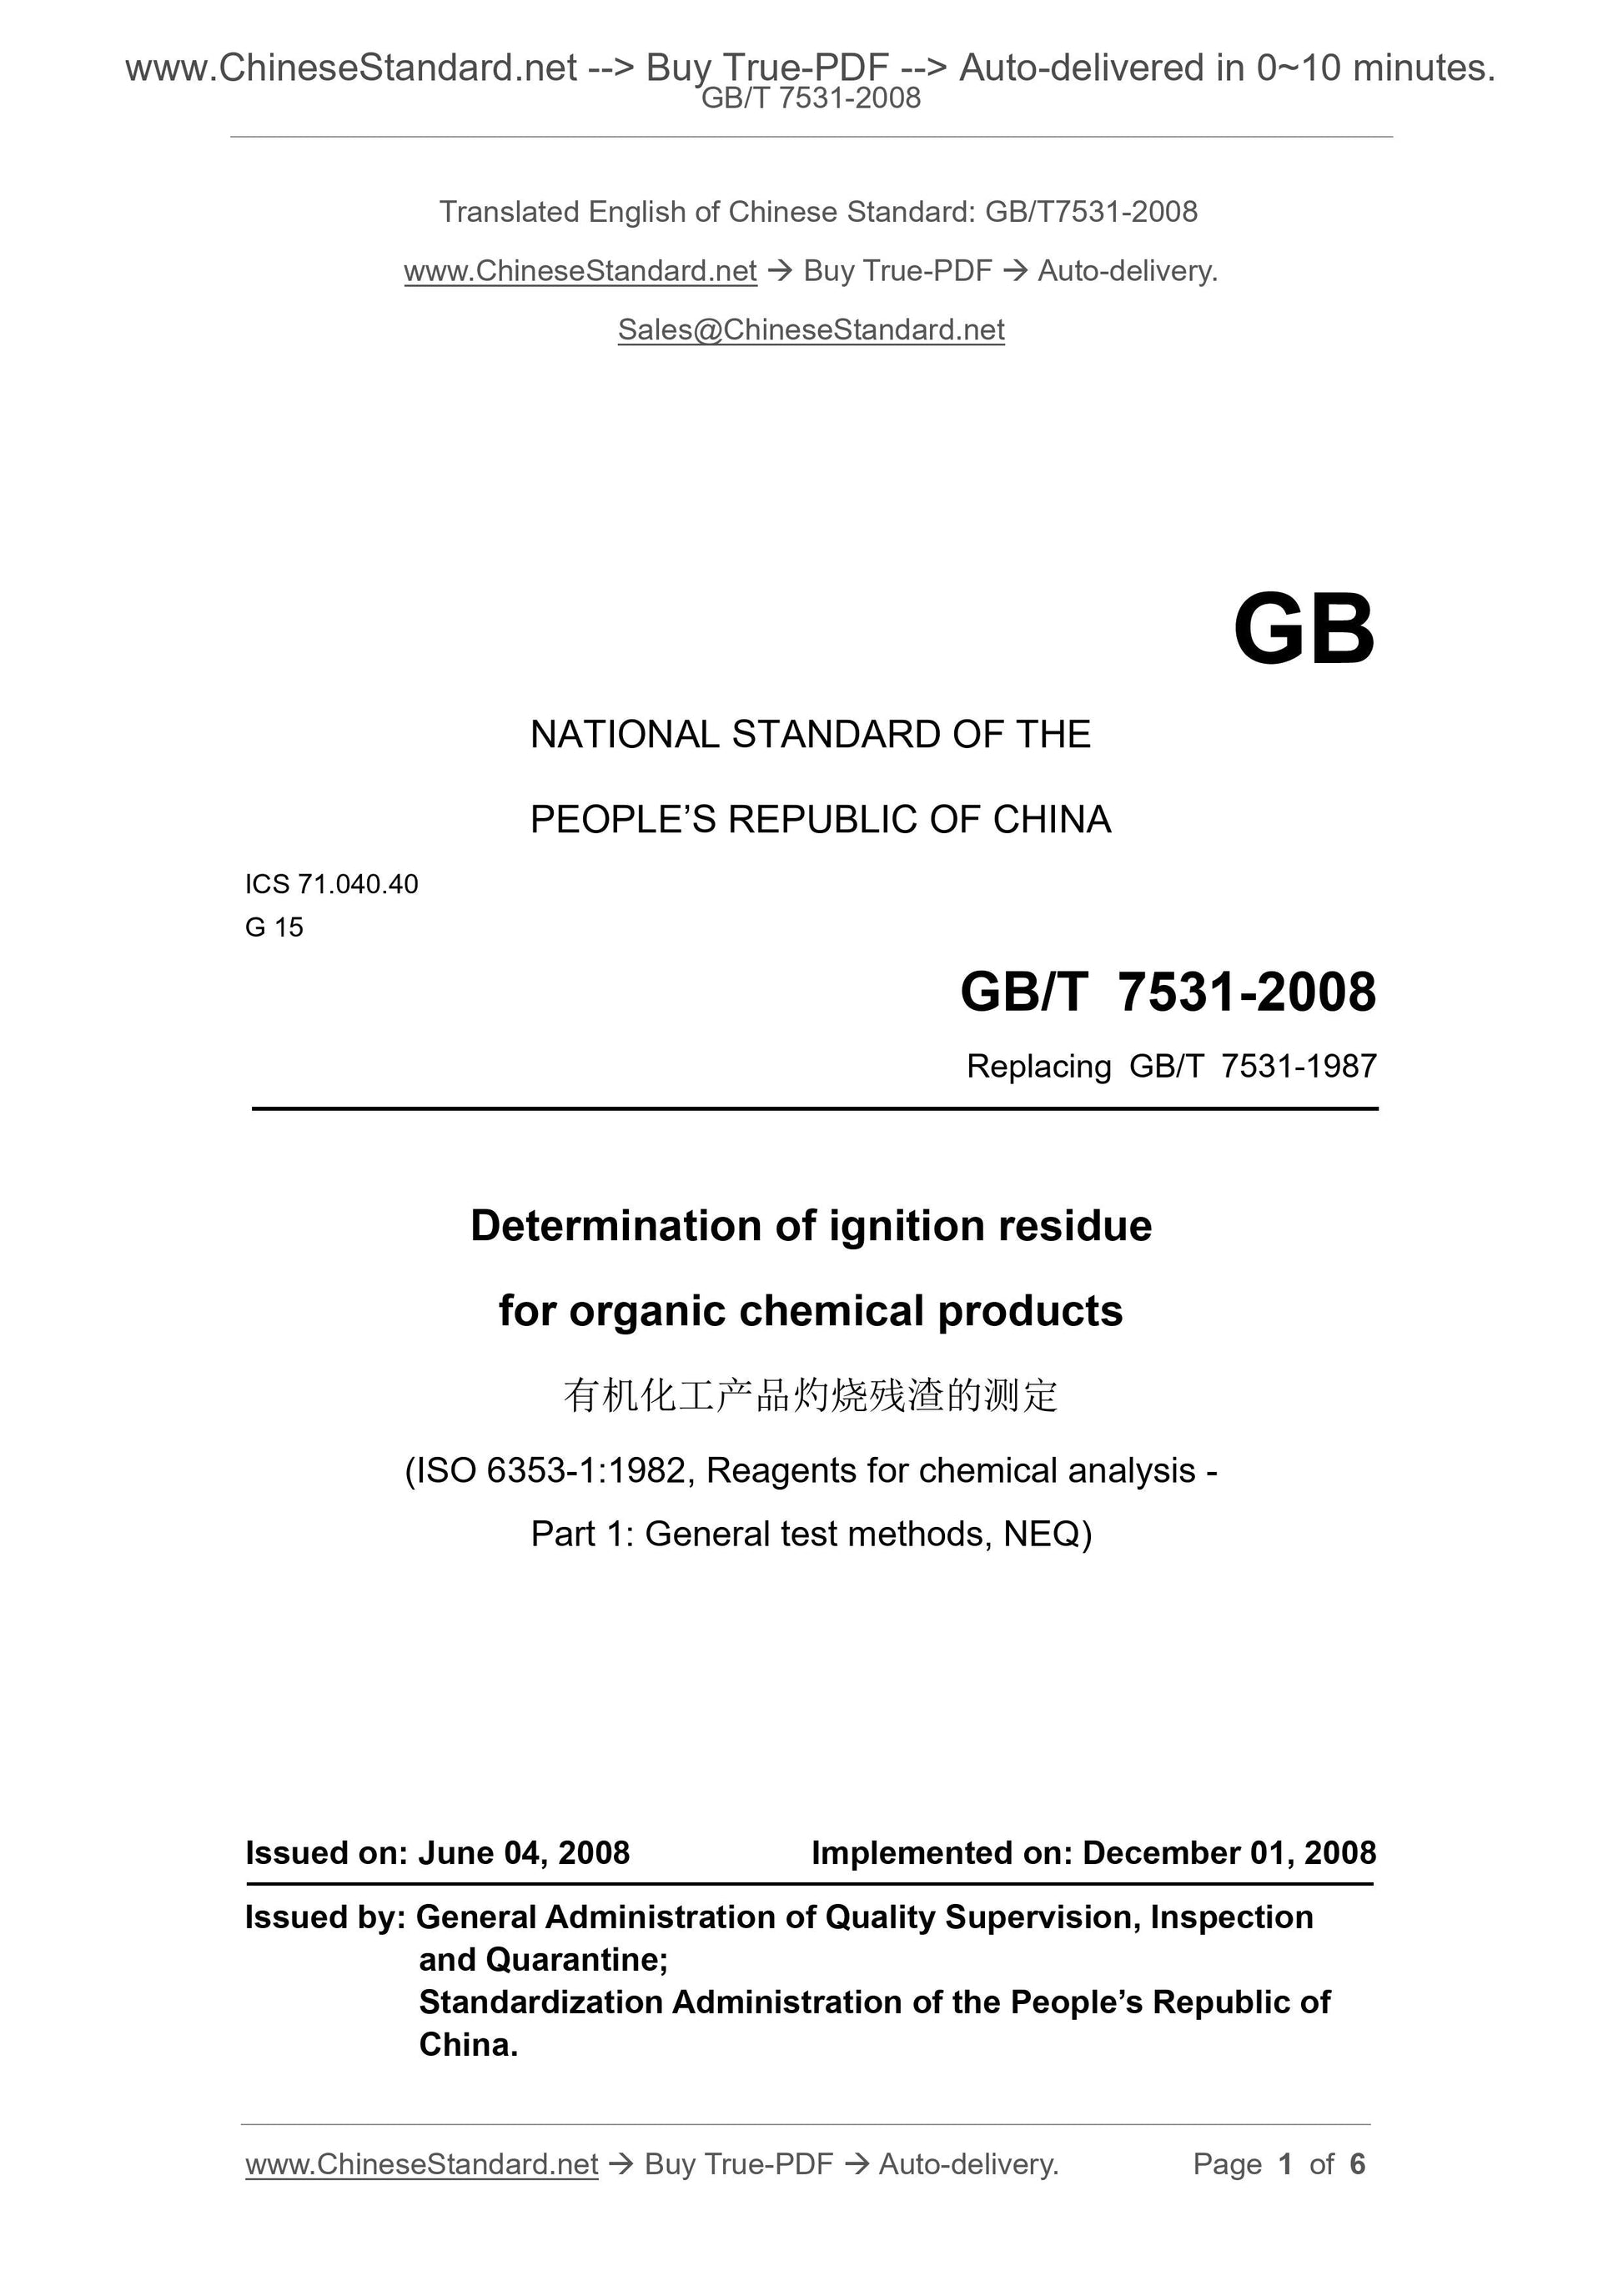 GB/T 7531-2008 Page 1